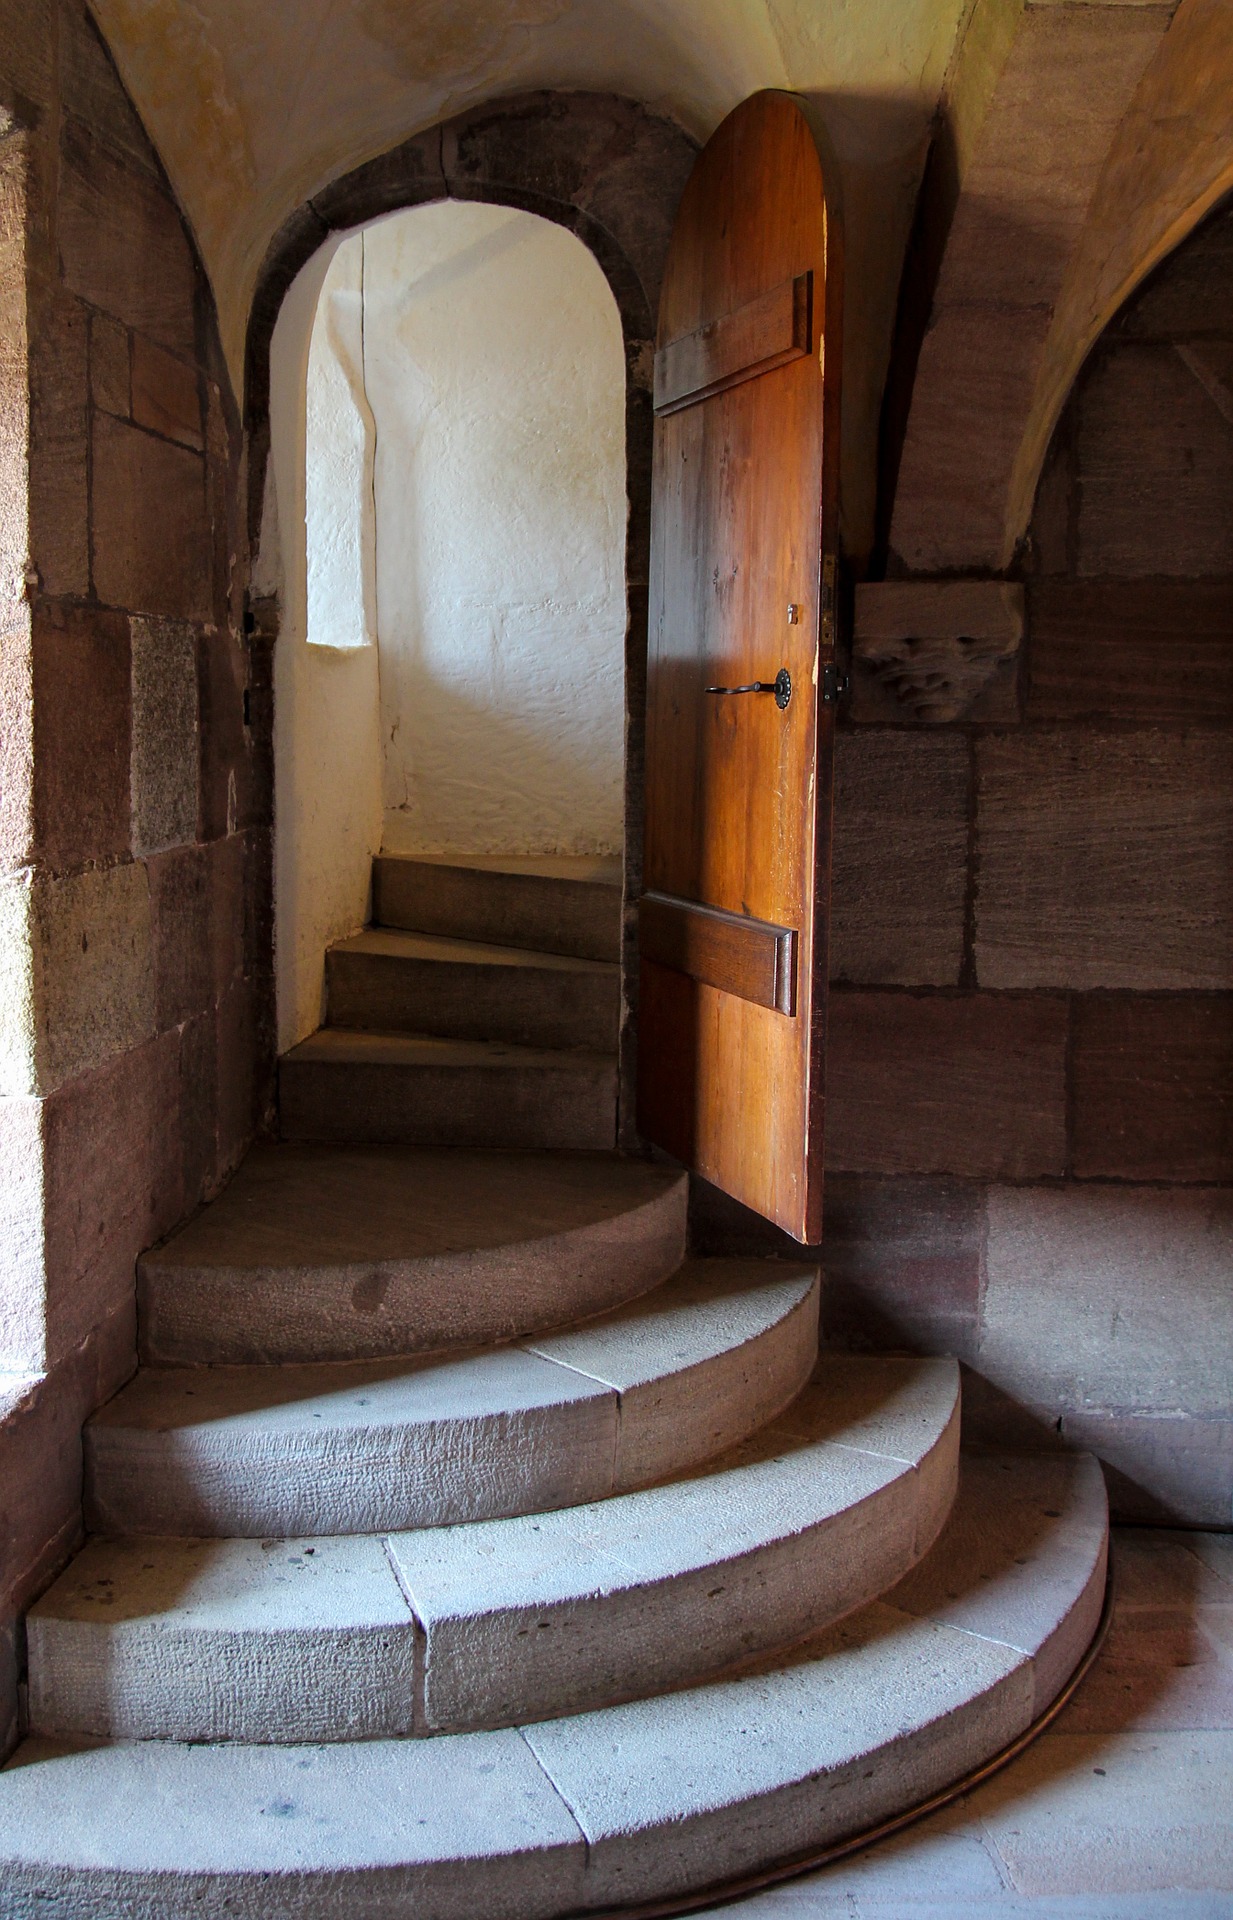 Stairs in the Tower, Architecture, Construction, Stair, Staircase, HQ Photo